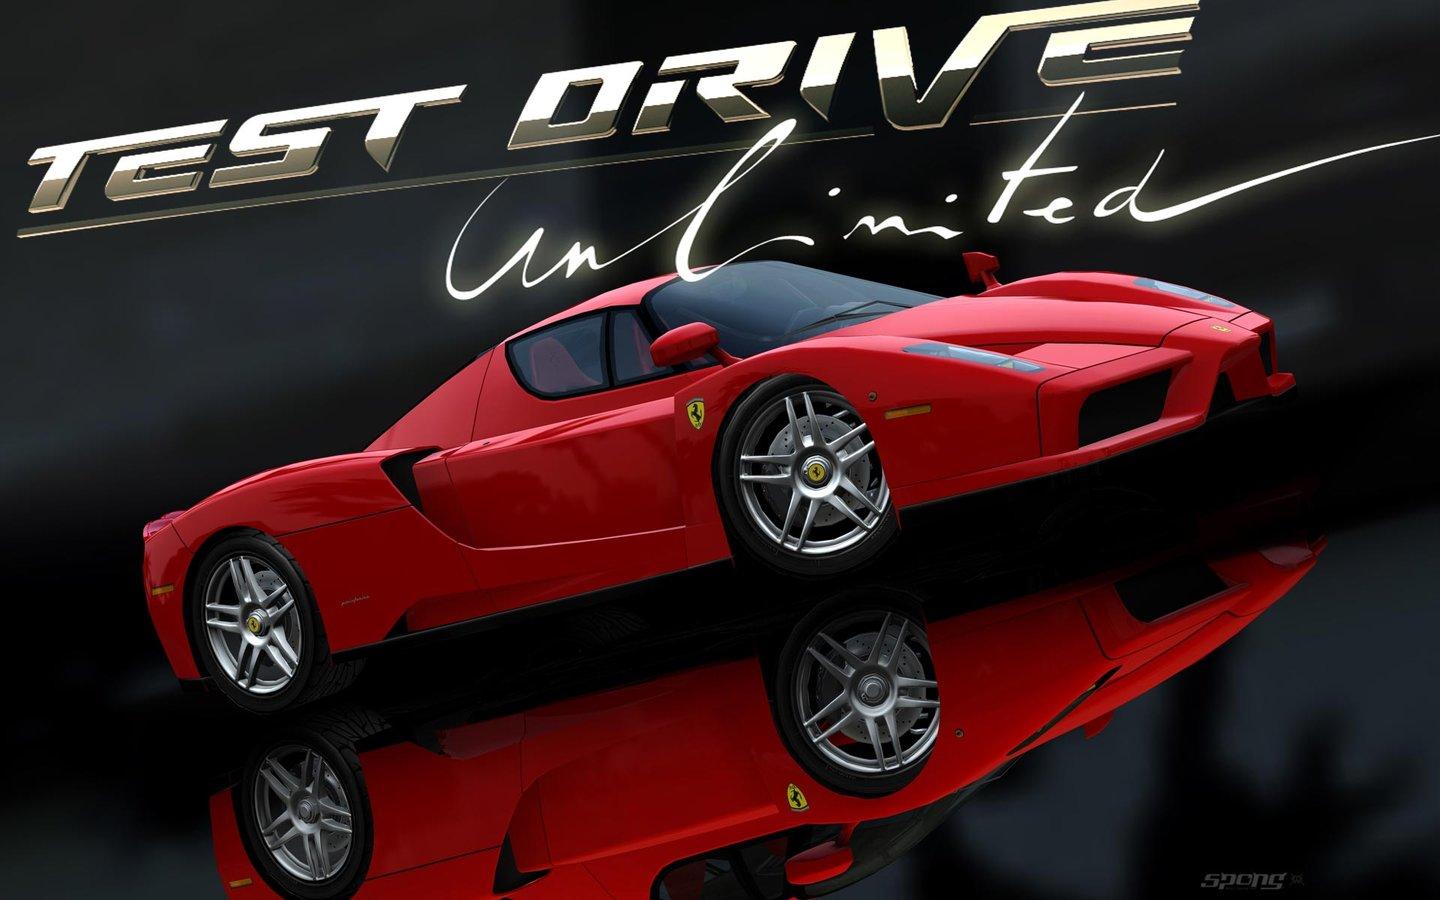 Wallpaper: Test Drive: Unlimited (1 of 4)